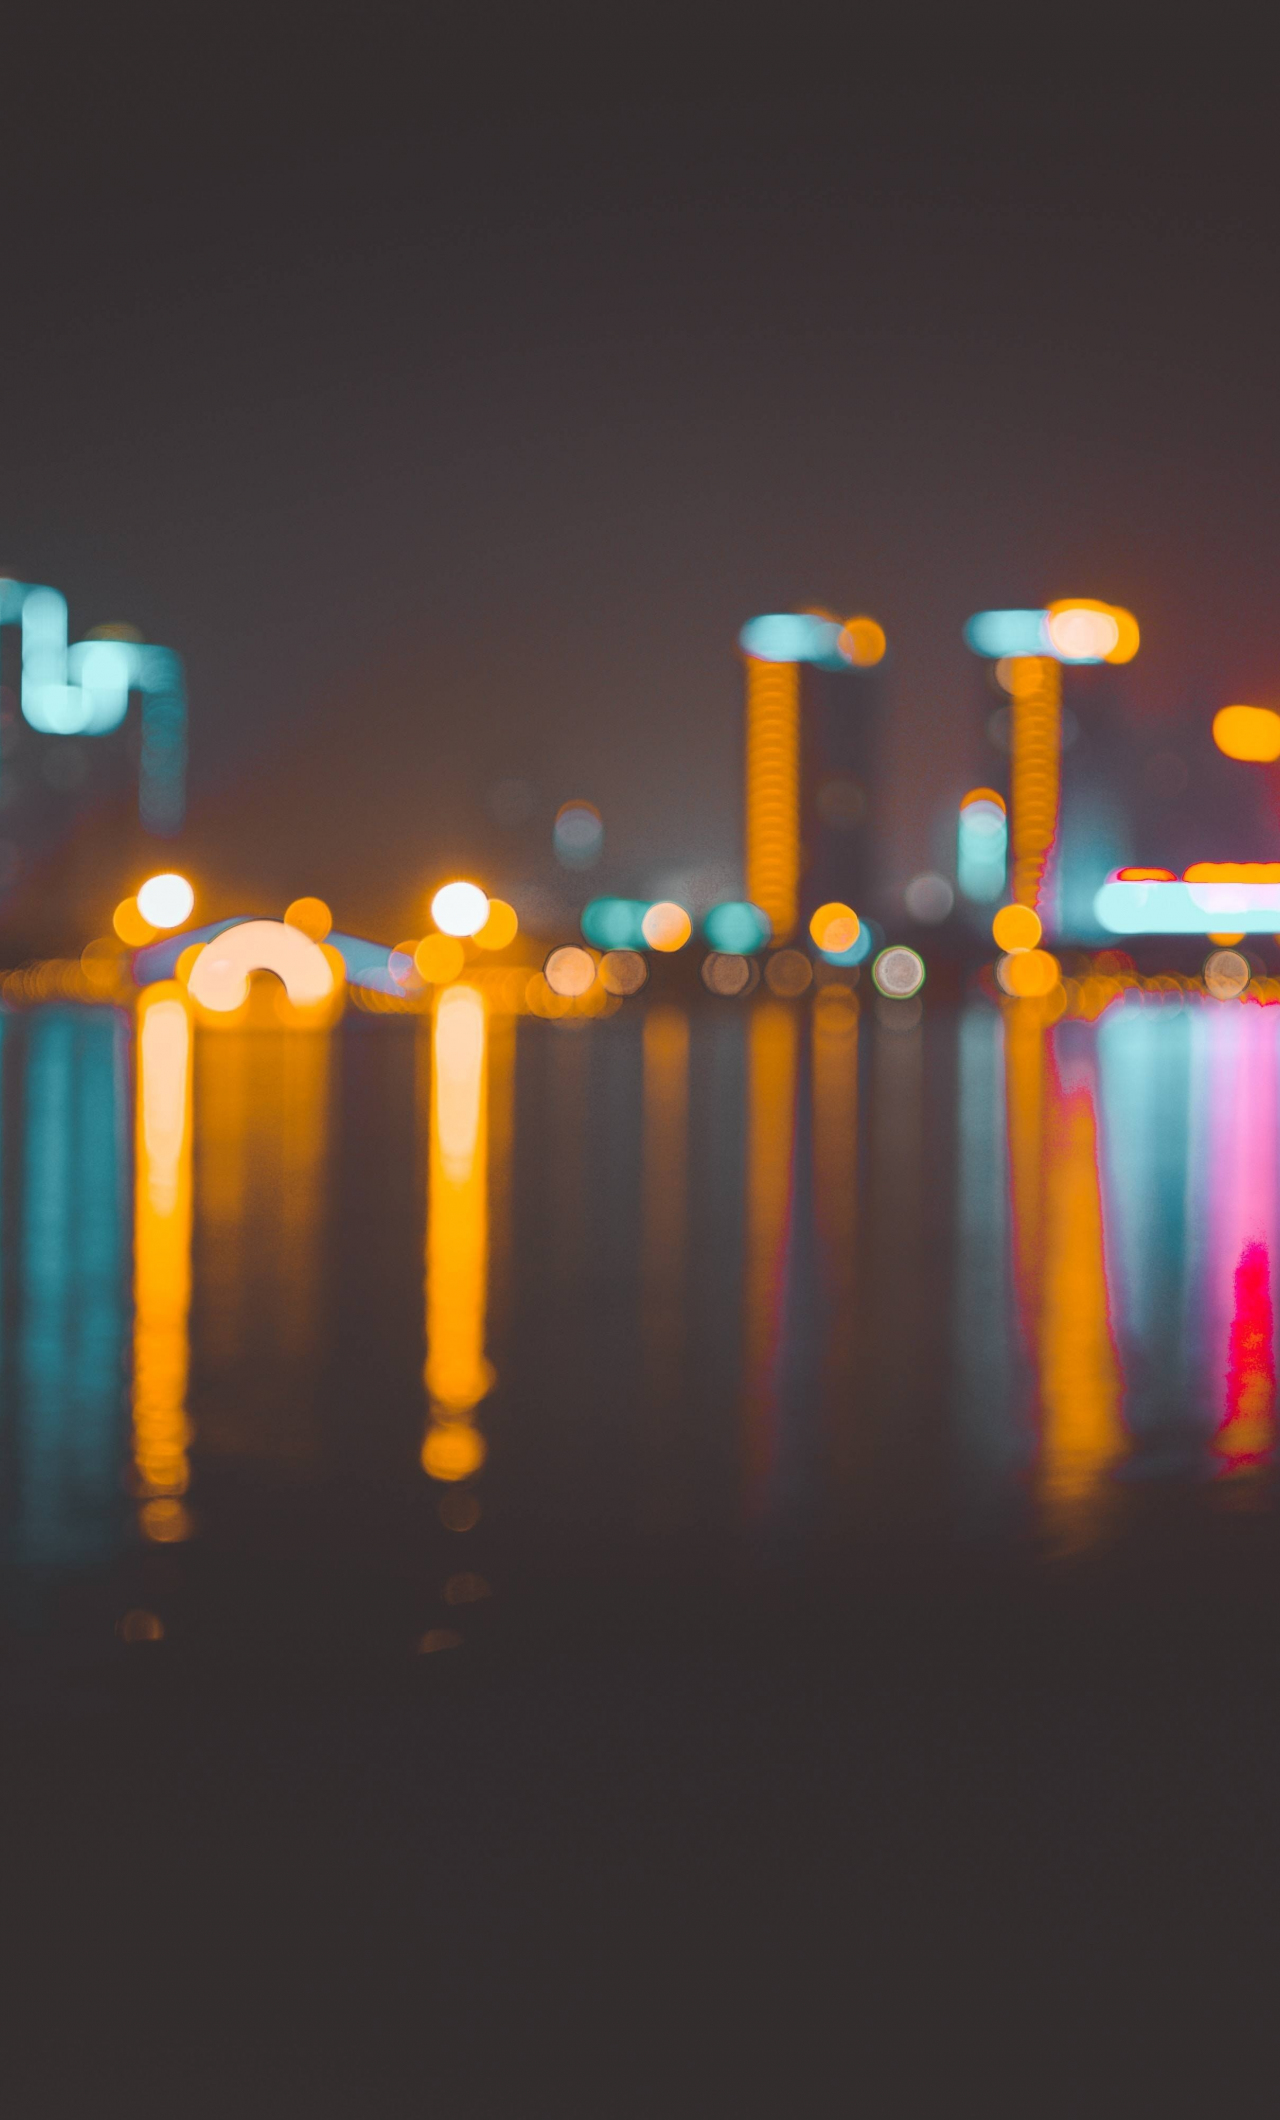 Download wallpaper 1280x2120 city, lights, blur, reflections, iphone 6  plus, 1280x2120 hd background, 7839